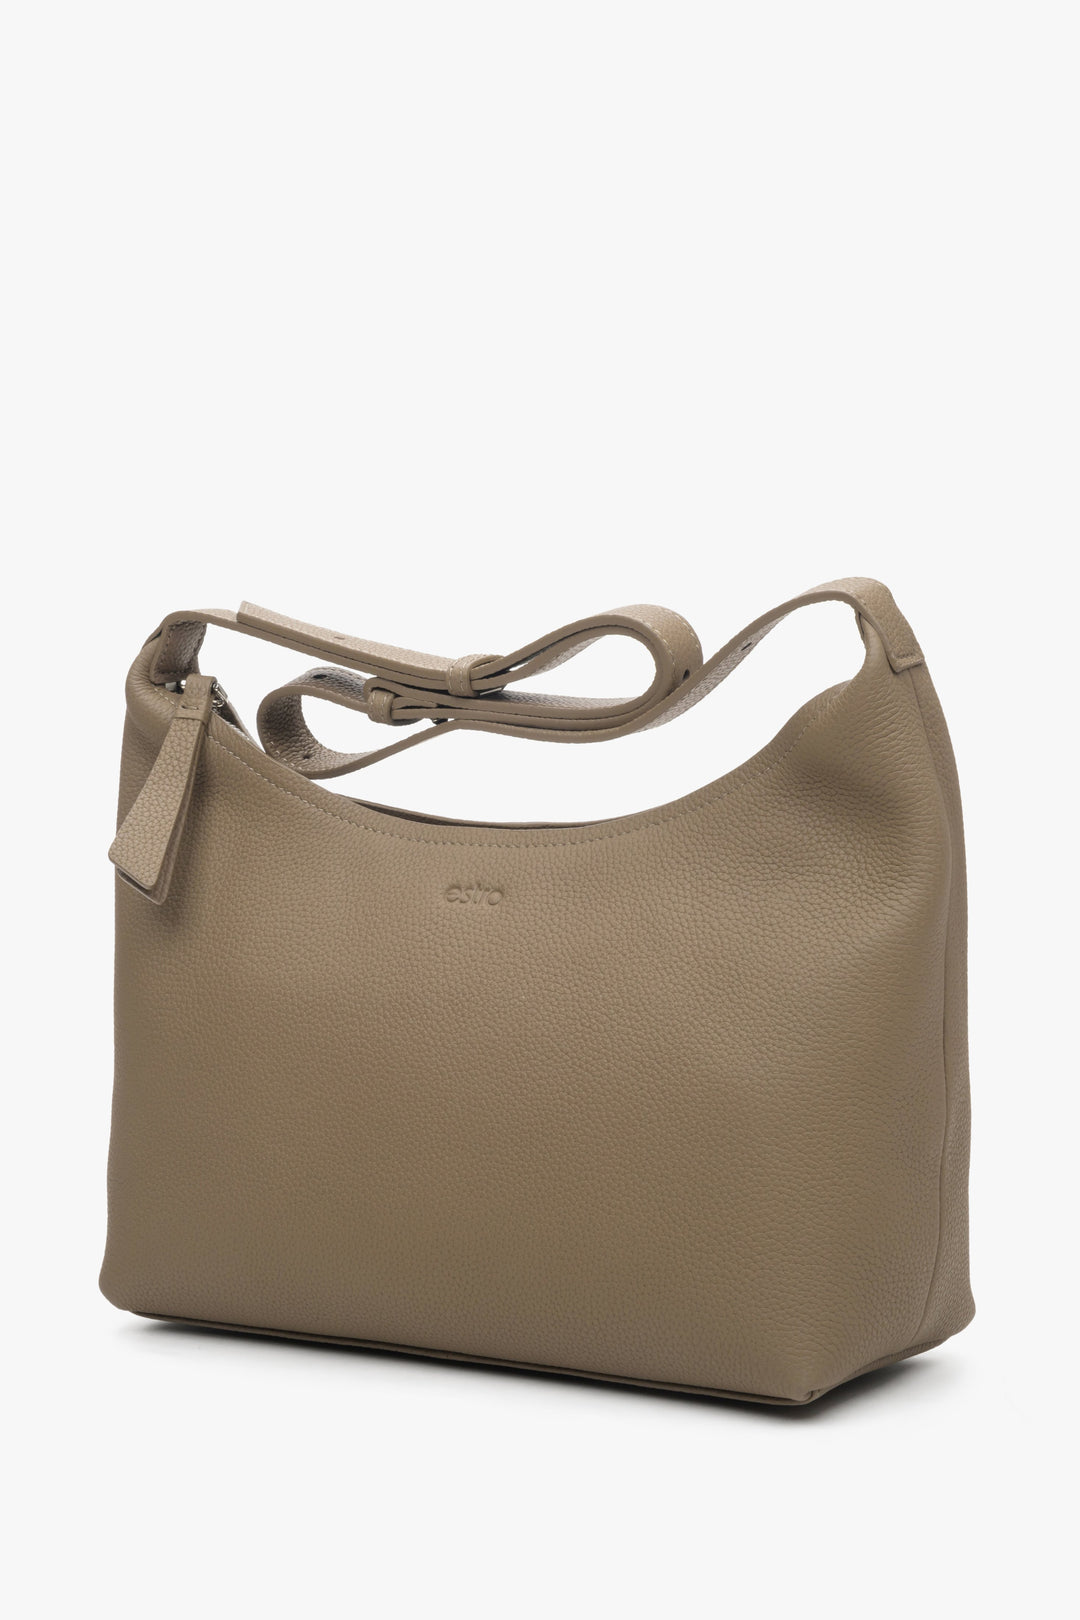 Women's grey-brown shoulder bag made of genuine leather by Estro.